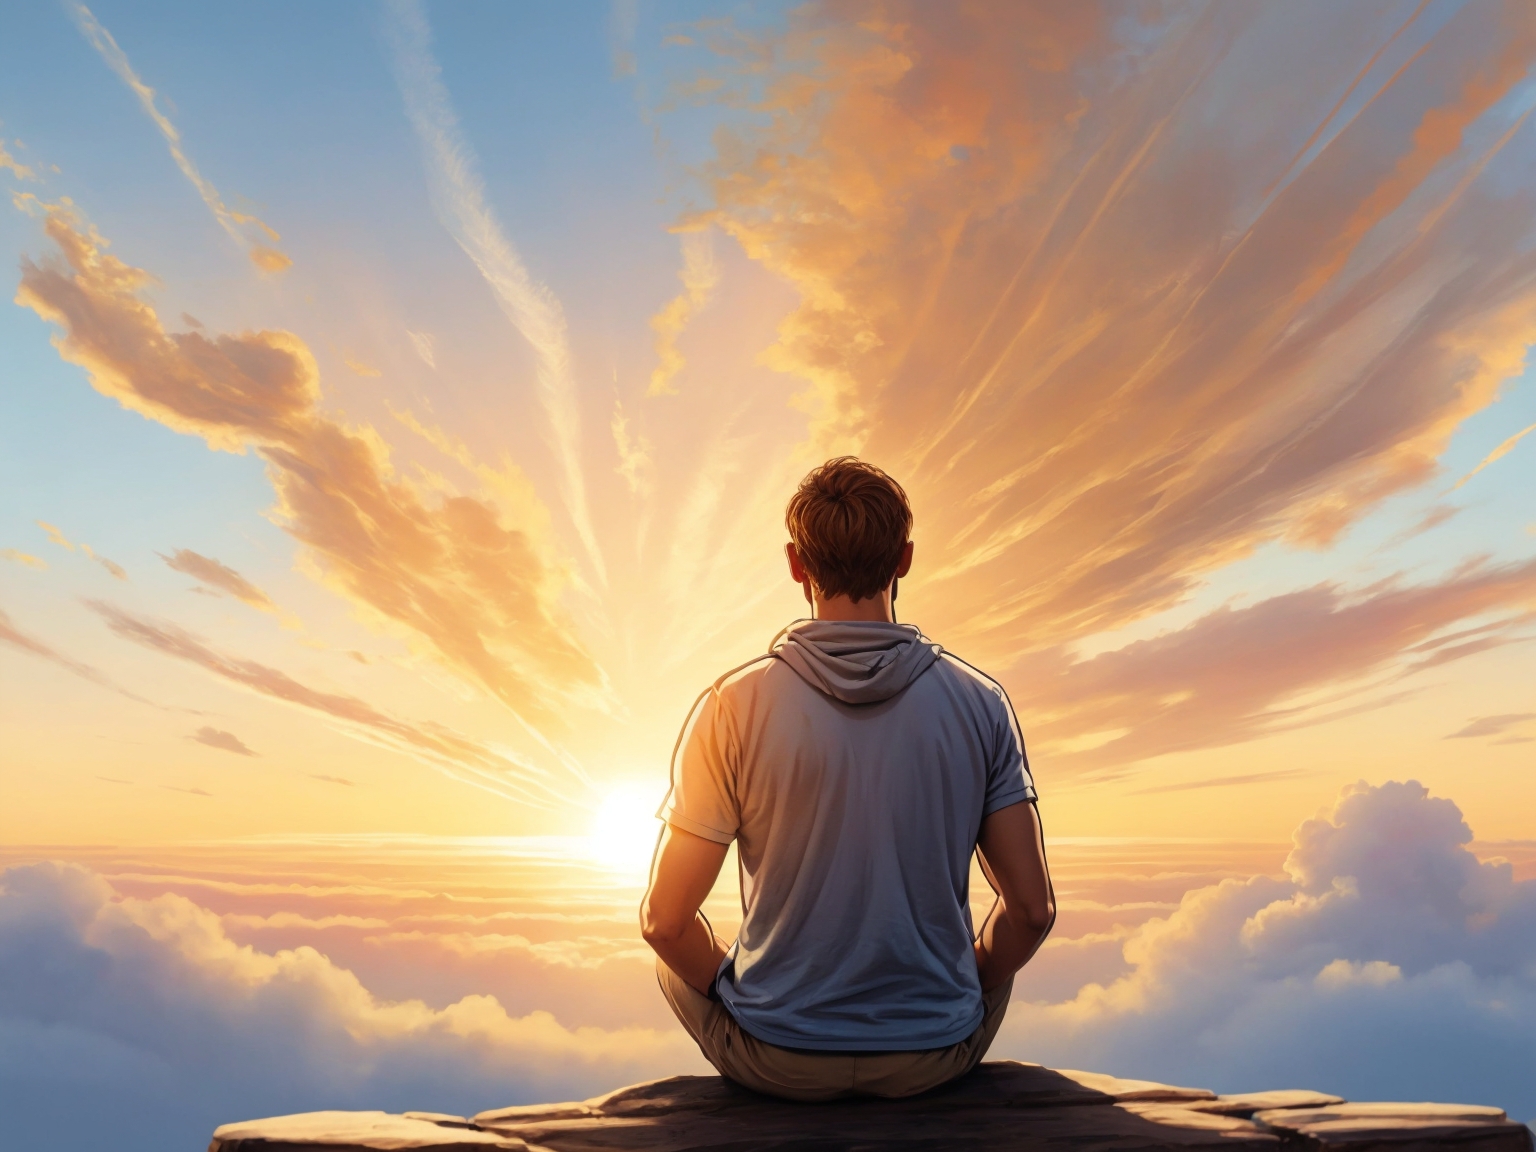 A self-development coach meditating atop a cliff, embracing the serene sunset amidst clouds.